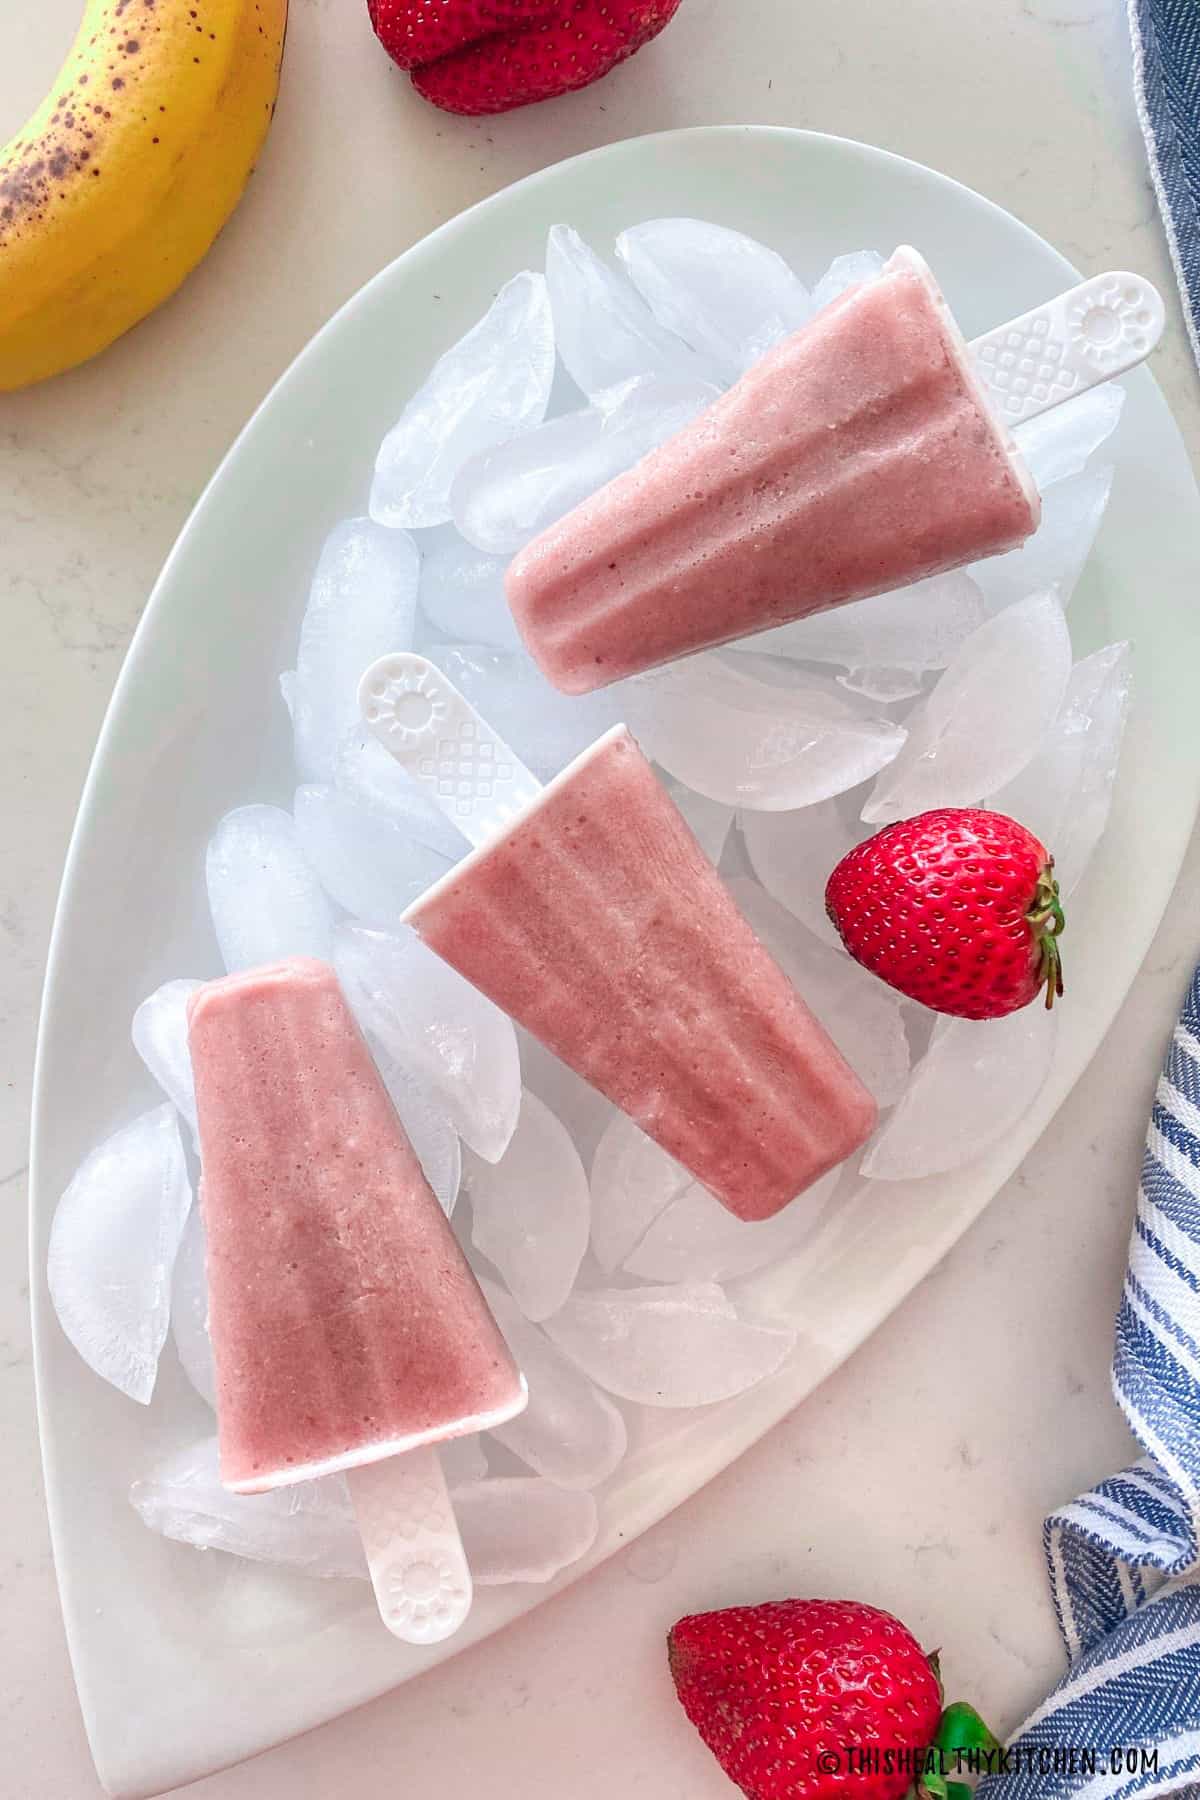 Three pink popsicles resting on ice cubes with strawberries scattered around.